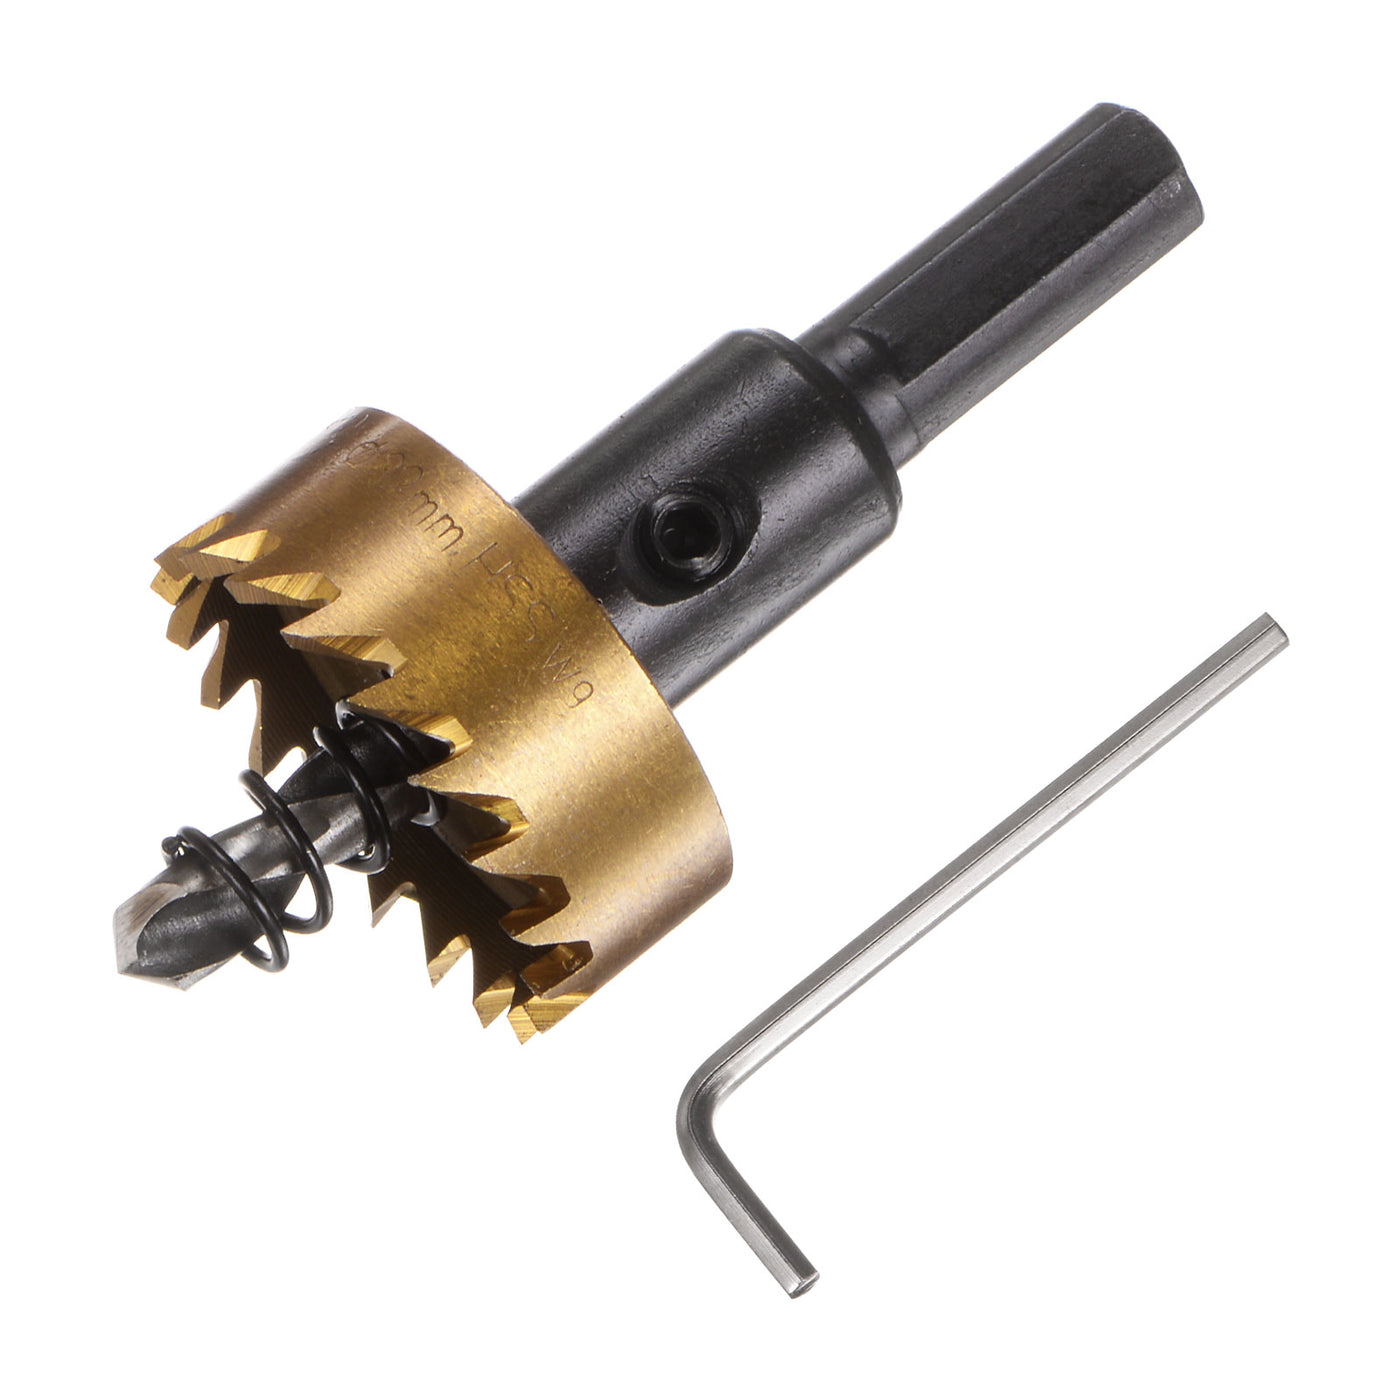 Harfington 32mm M35 HSS (High Speed Steel) Hole Saw Drill Bit for Stainless Steel Alloy